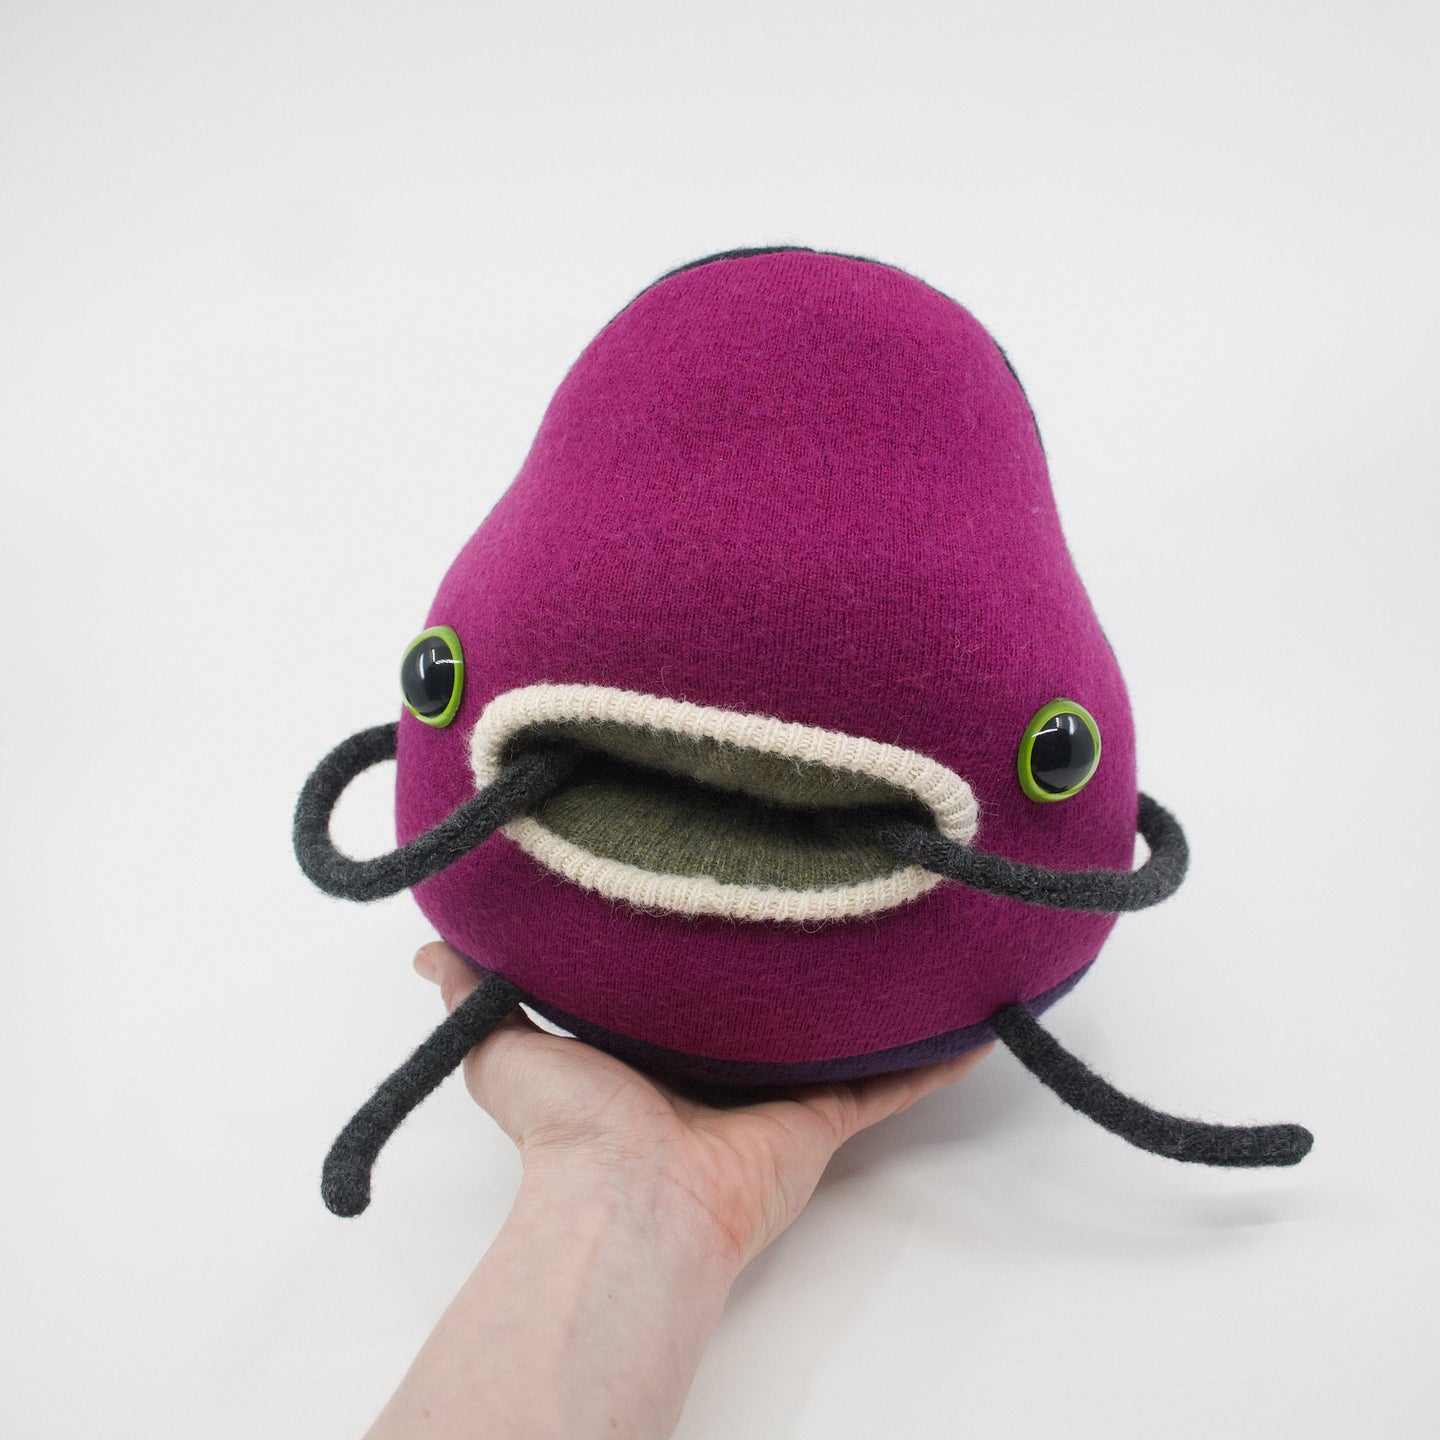 pink cuddly plush monster with cashmere pocket mouth